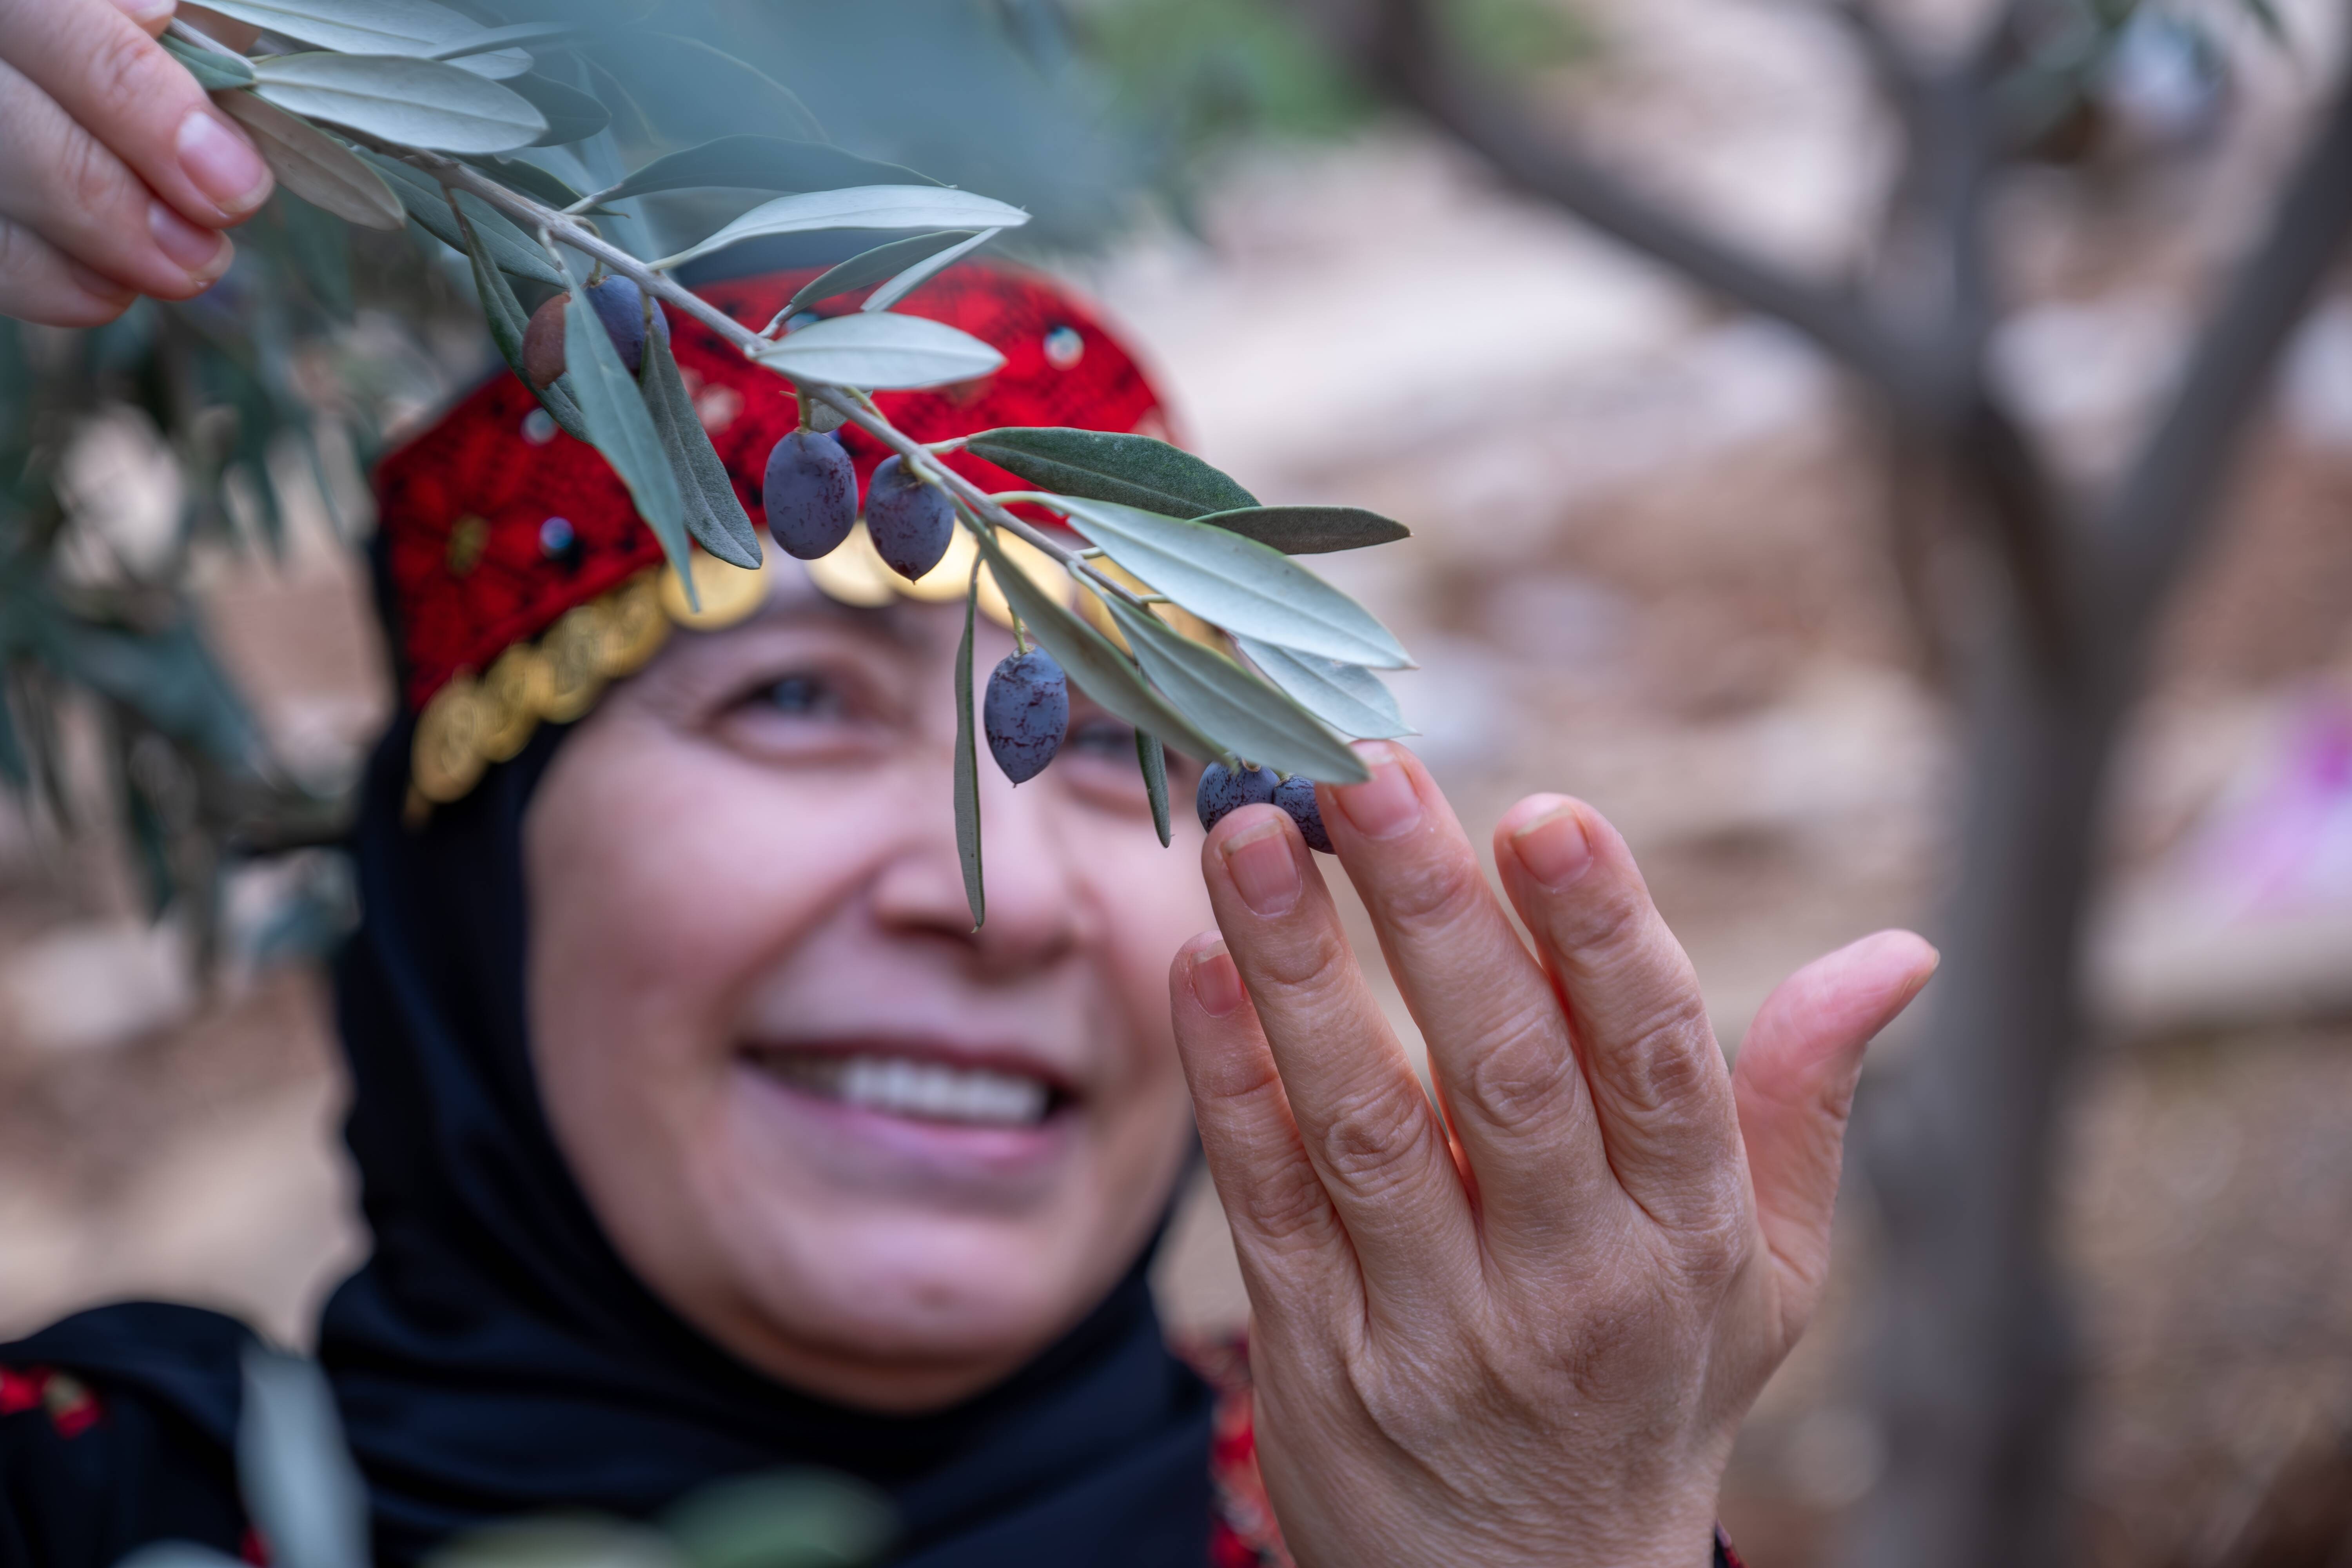 Palestinian woman in olive trees field holding branch